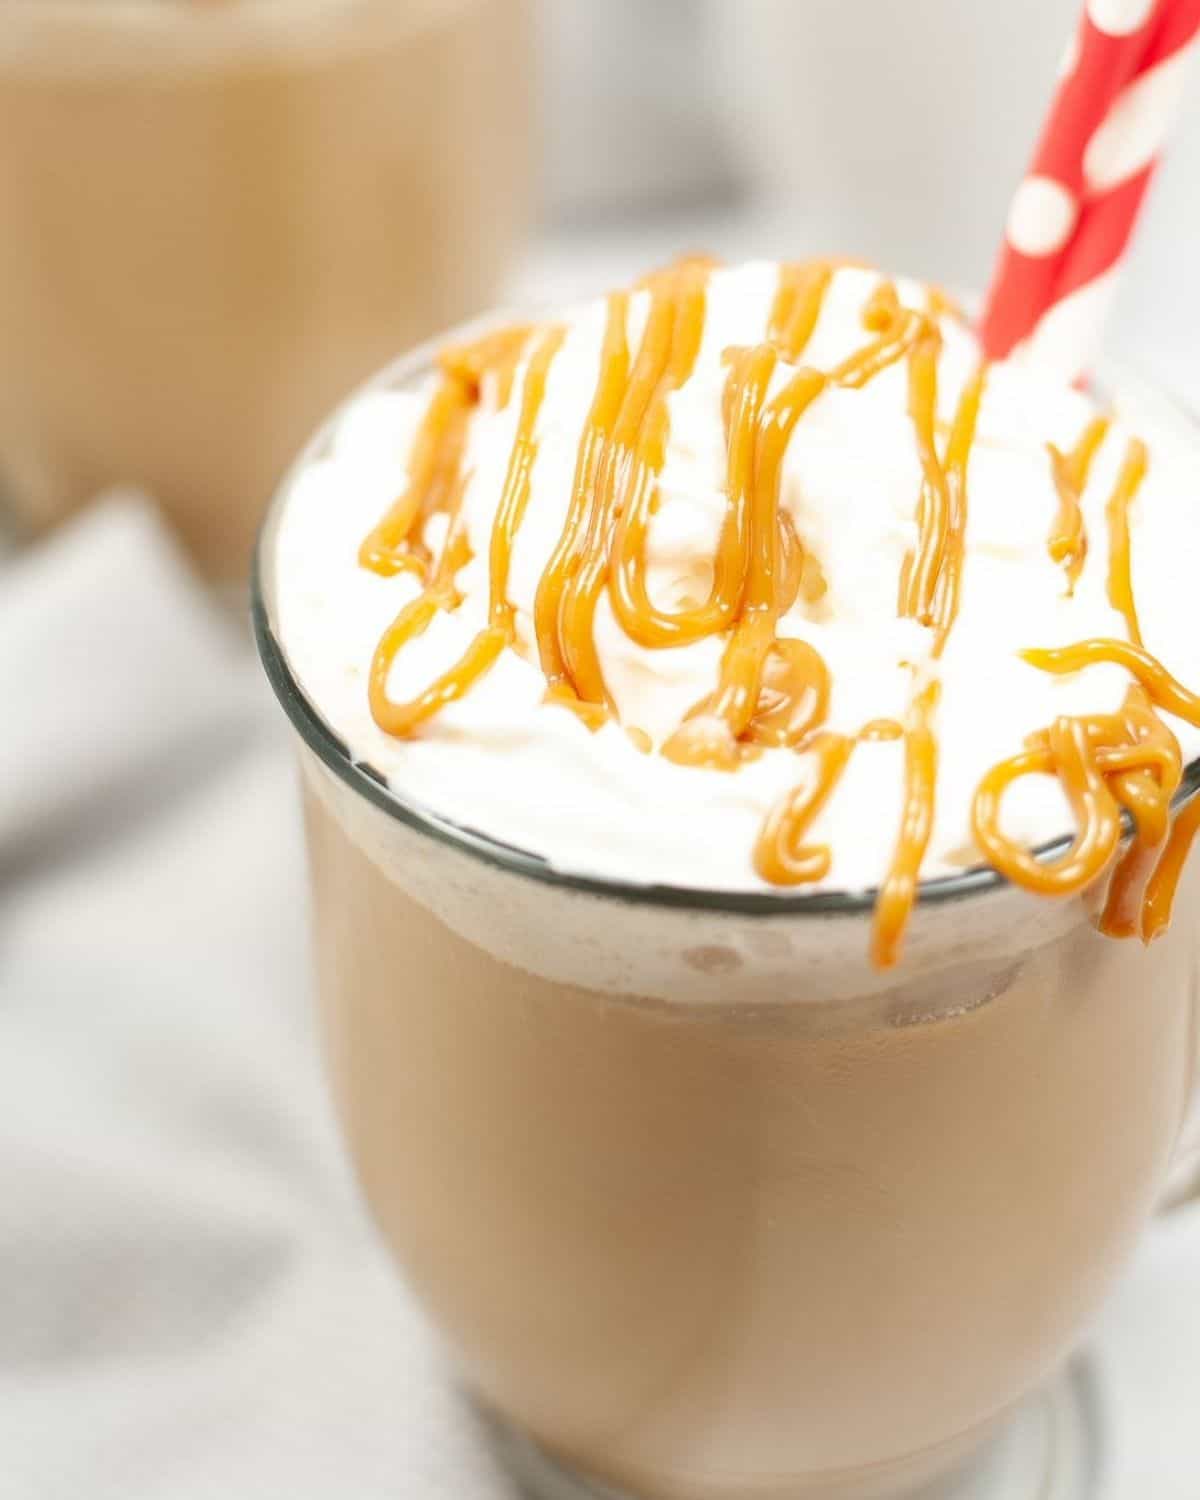 A glass filled with macchiato and topped with whipped cream, caramel and a red polka dot straw in it.